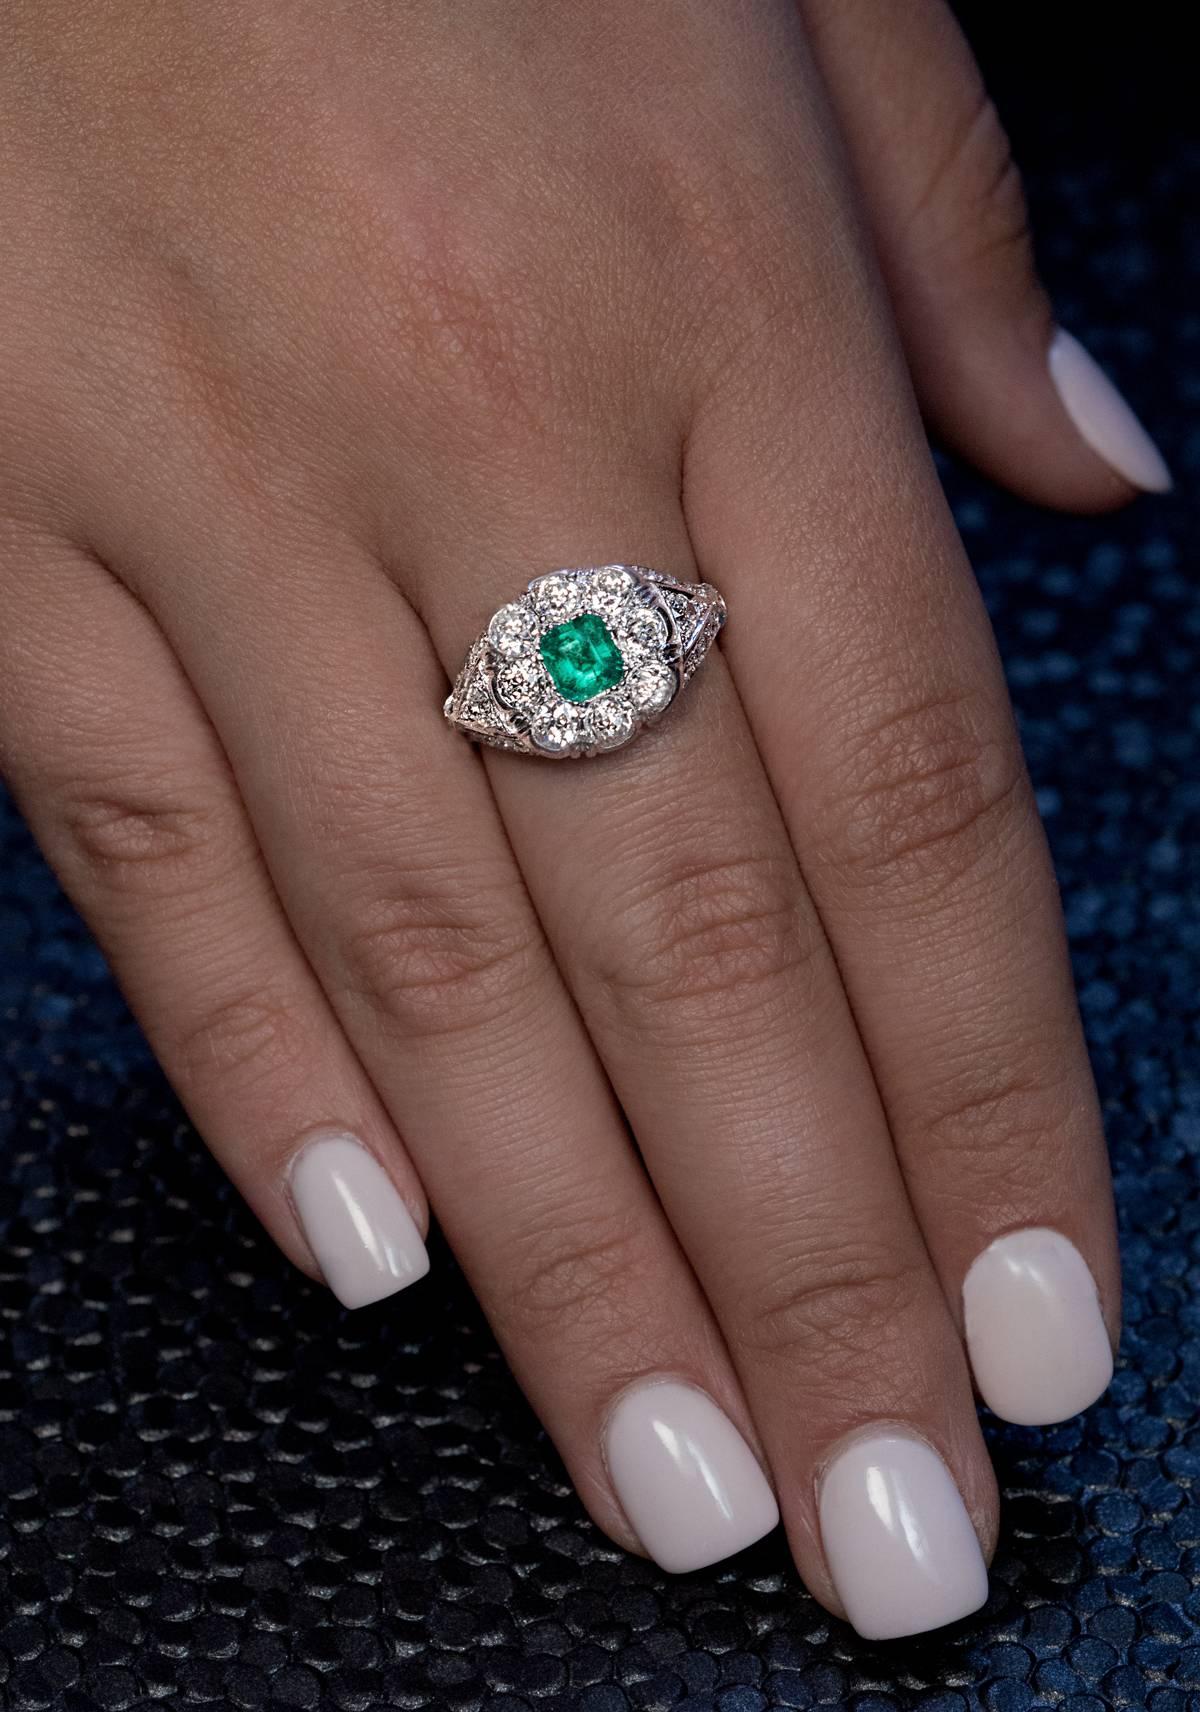 Circa 1925
This vintage platinum ring is centered with an emerald-cut emerald of a vivid bluish green color (5.63 x 5.14 x 3.55 mm, approximately 0.75 ct) framed by seven bright white (F-G-H color, SI clarity) old European cut diamonds. The